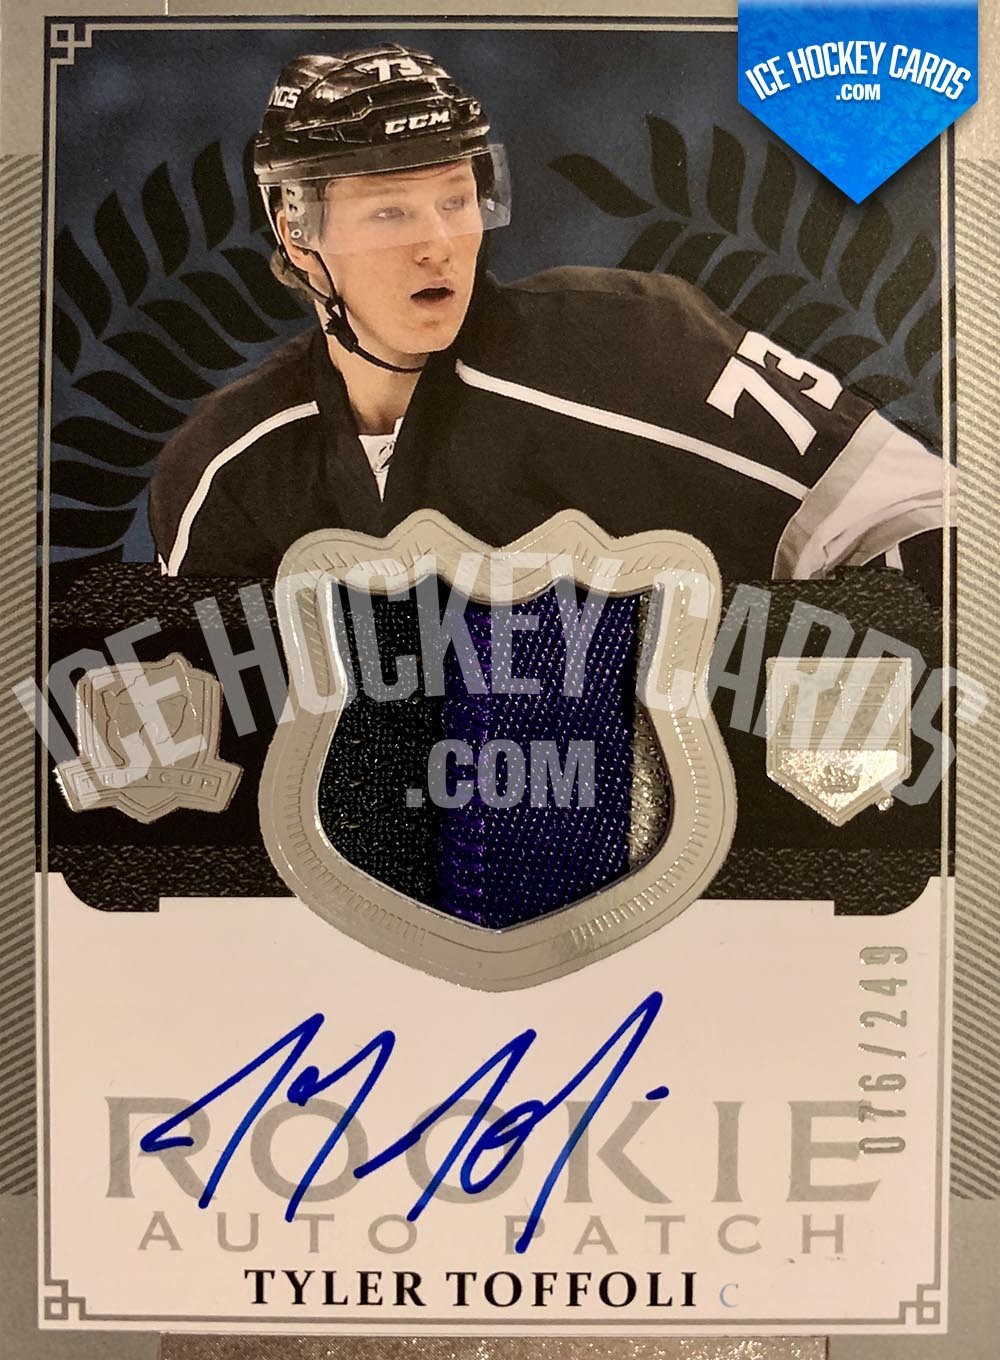 Upper Deck - The Cup 2013-14 - Tyler Toffoli Rookie Auto Patch Card